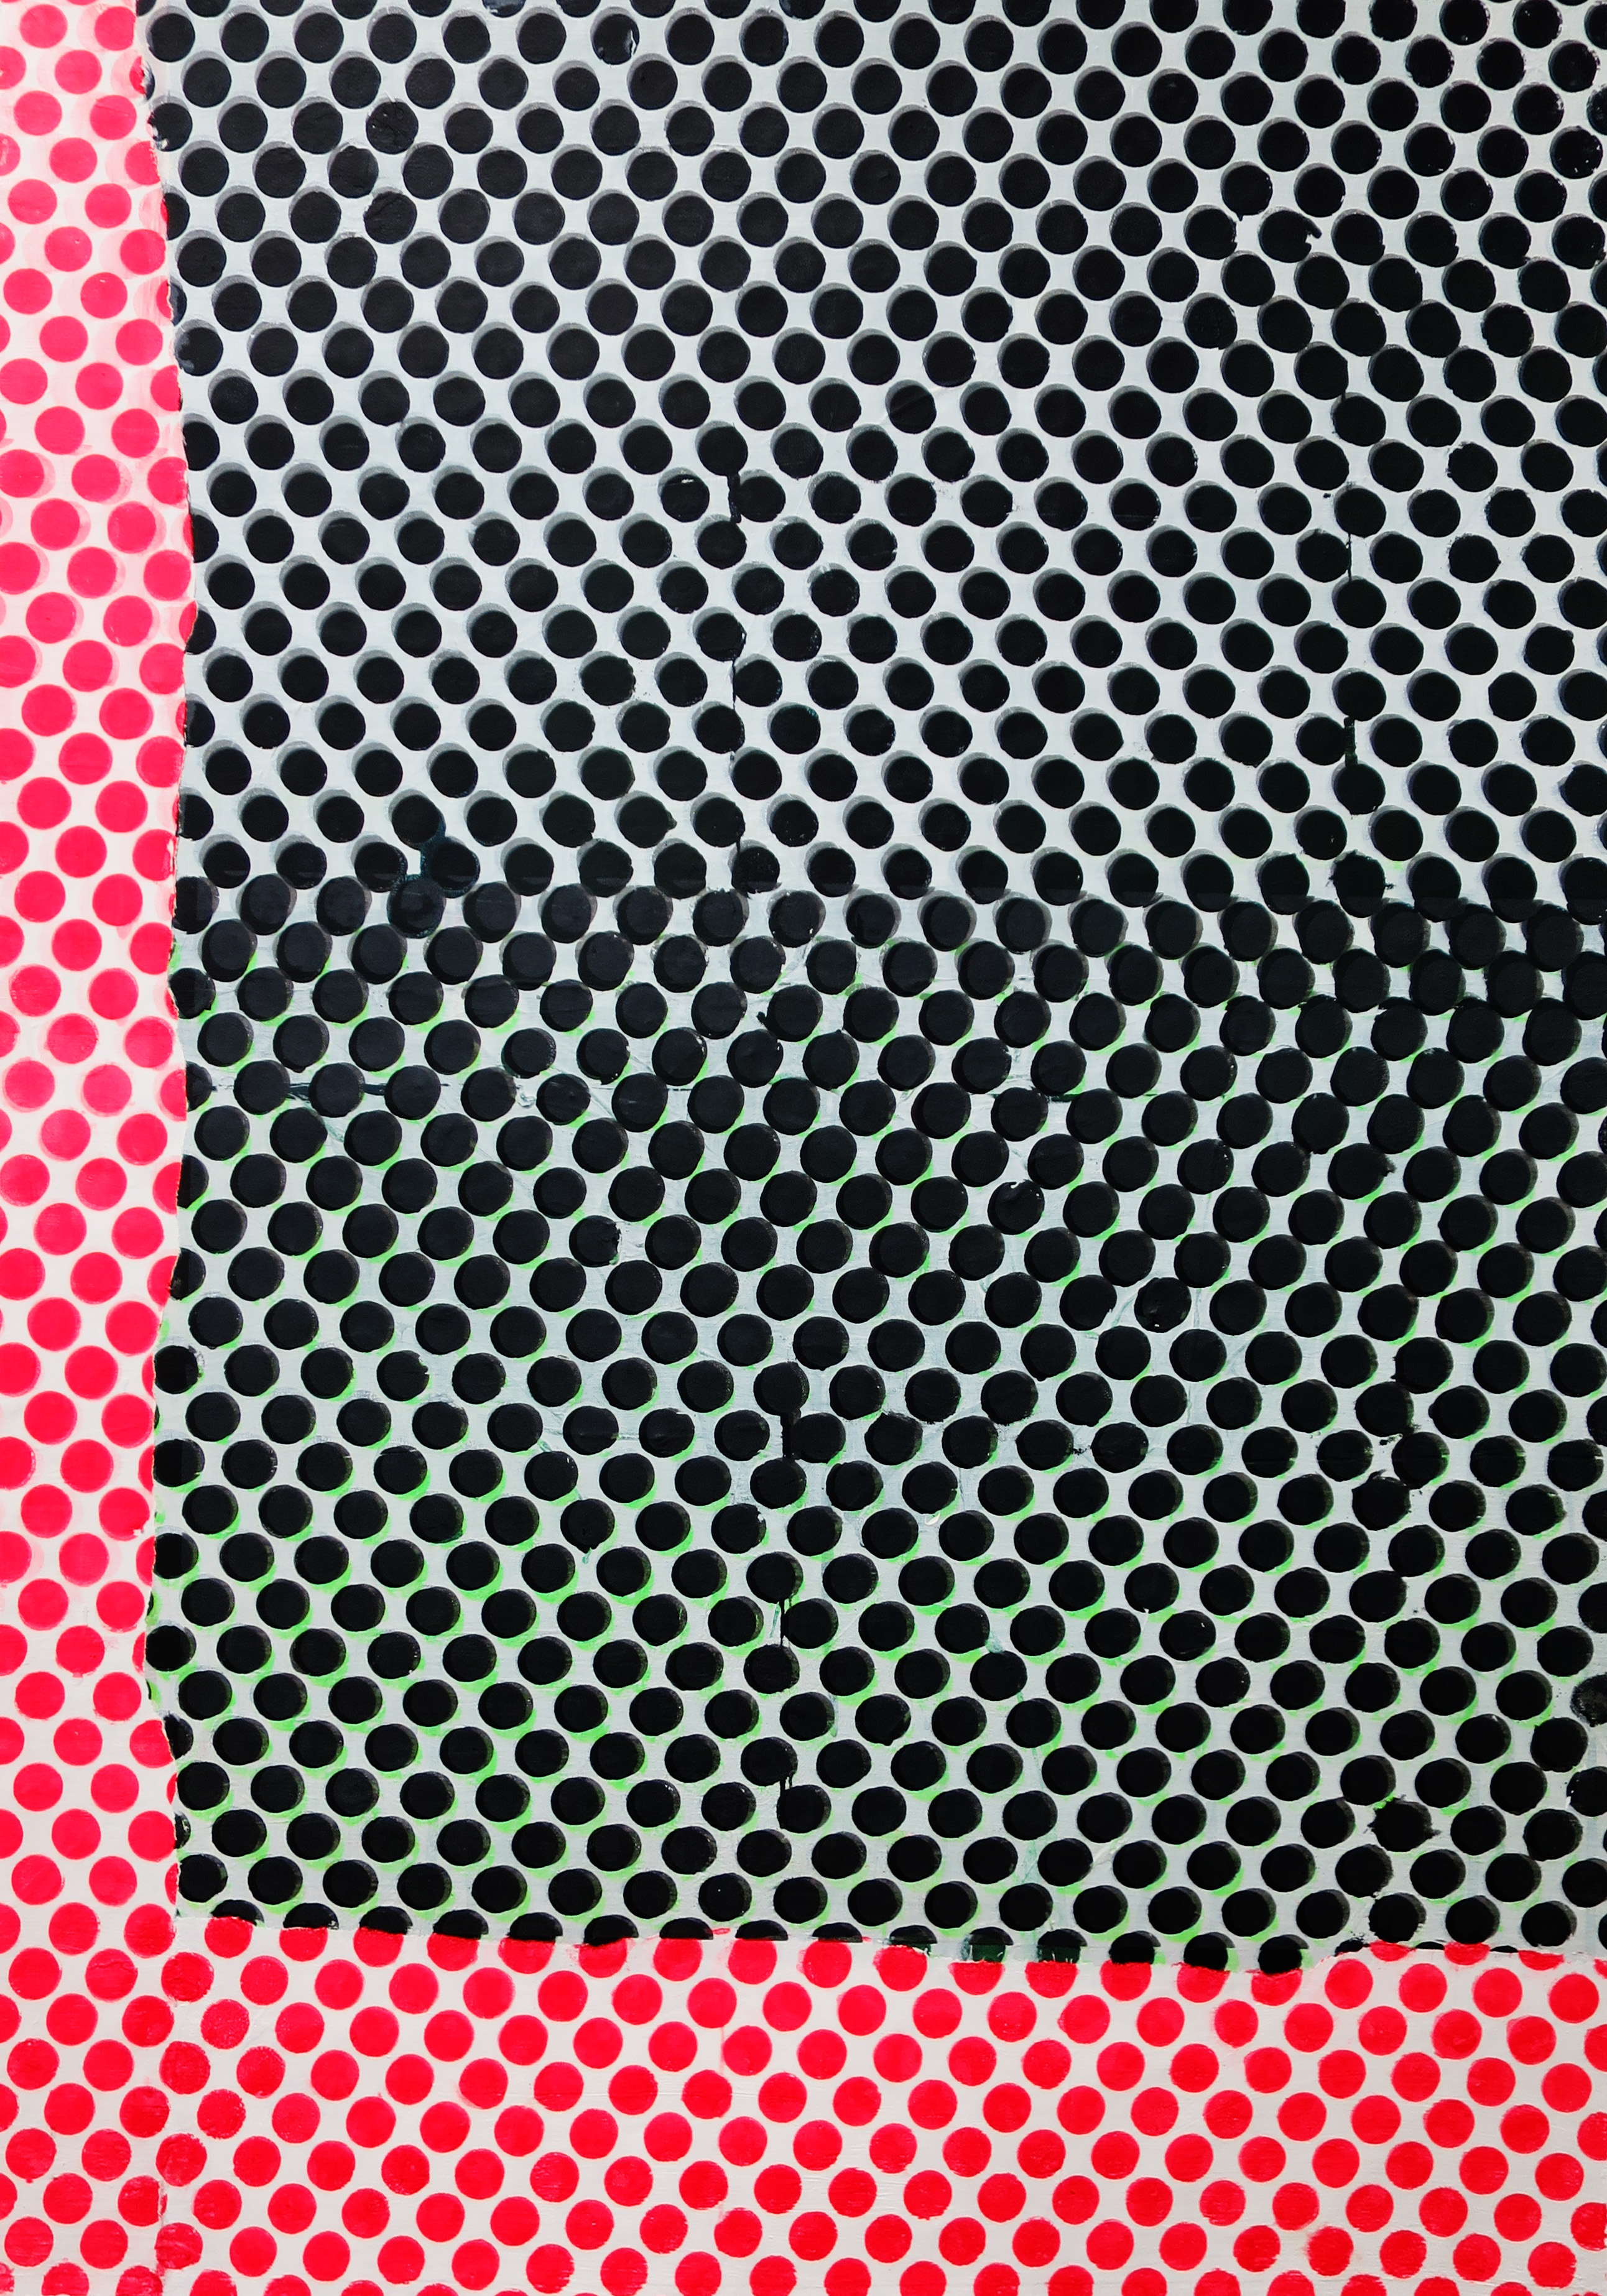 Pink and Black Dots 36x26 2017